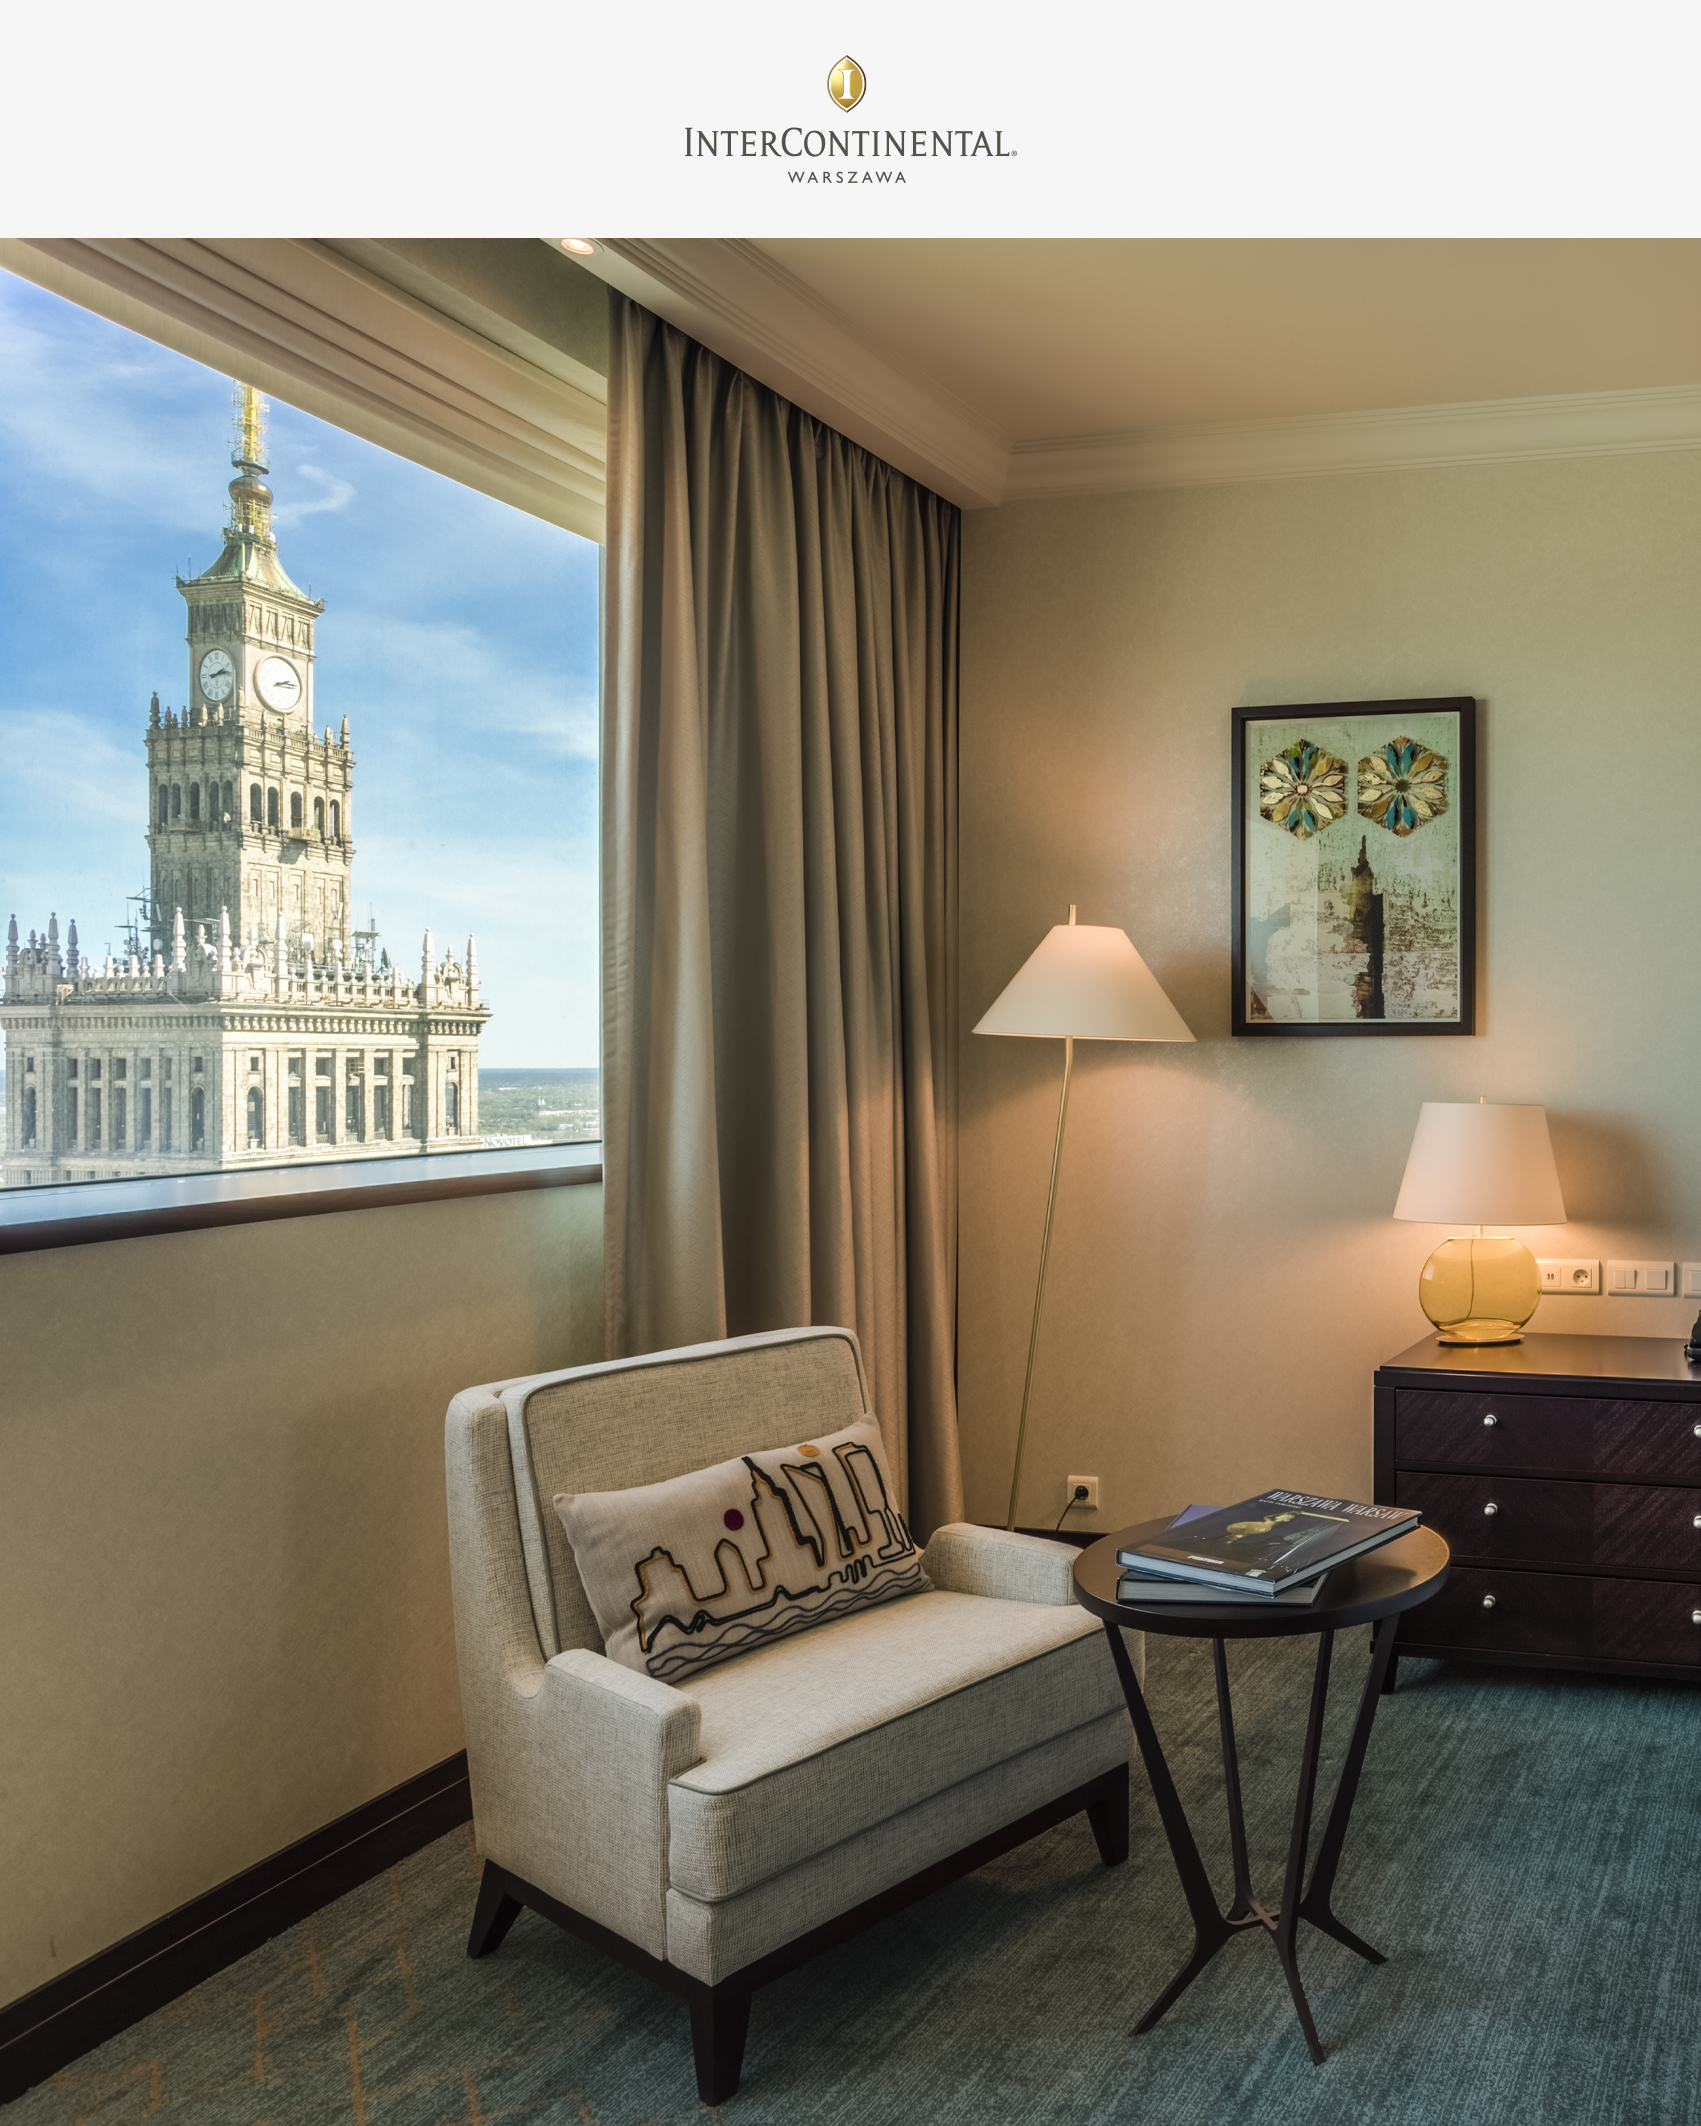 Stay in a Classic Room on a High Floor with a view of the Palace of Culture and Science (1 night / 1 person)